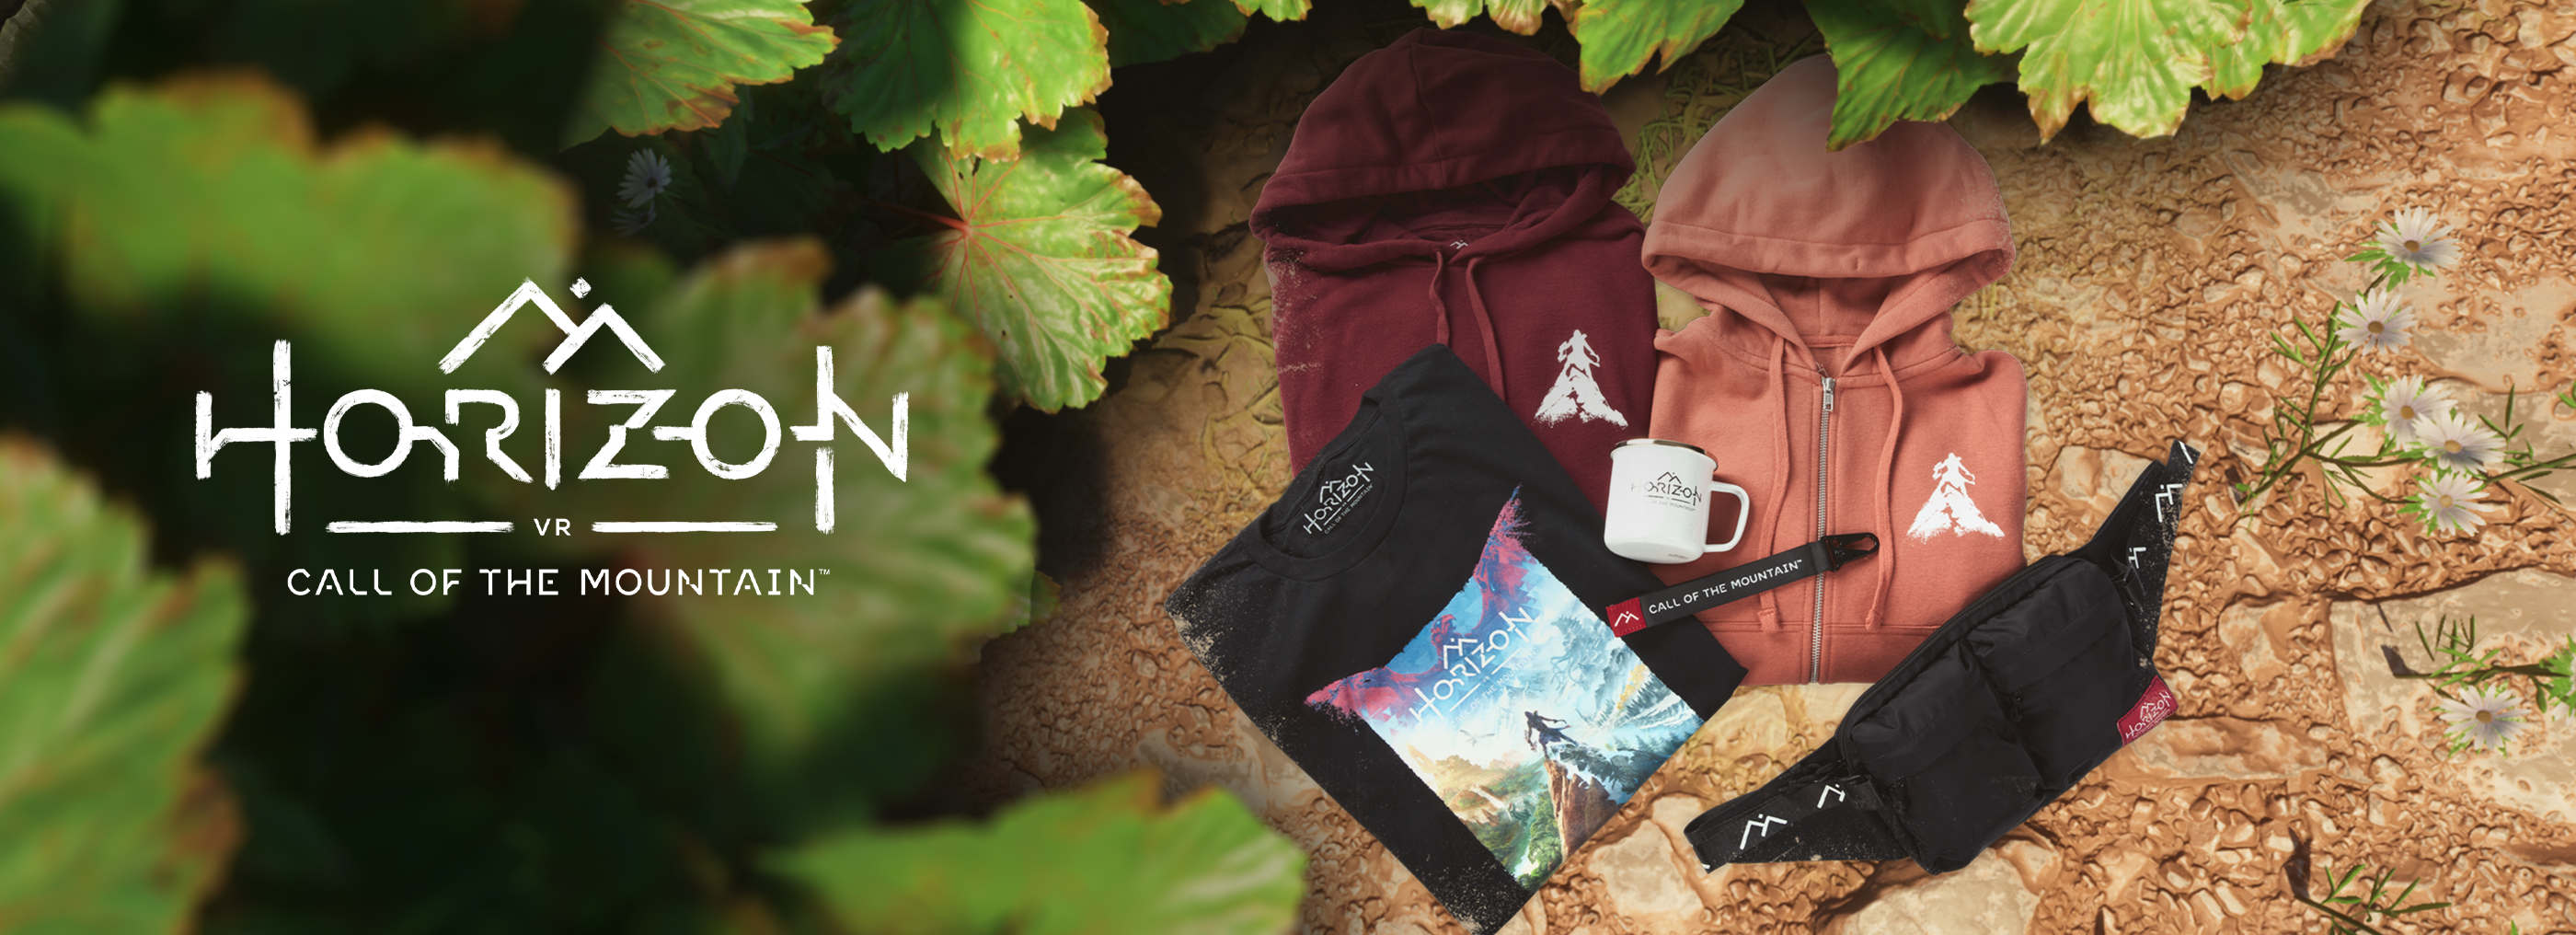 Climb to new heights with fresh Horizon Call of the Mountain gear!